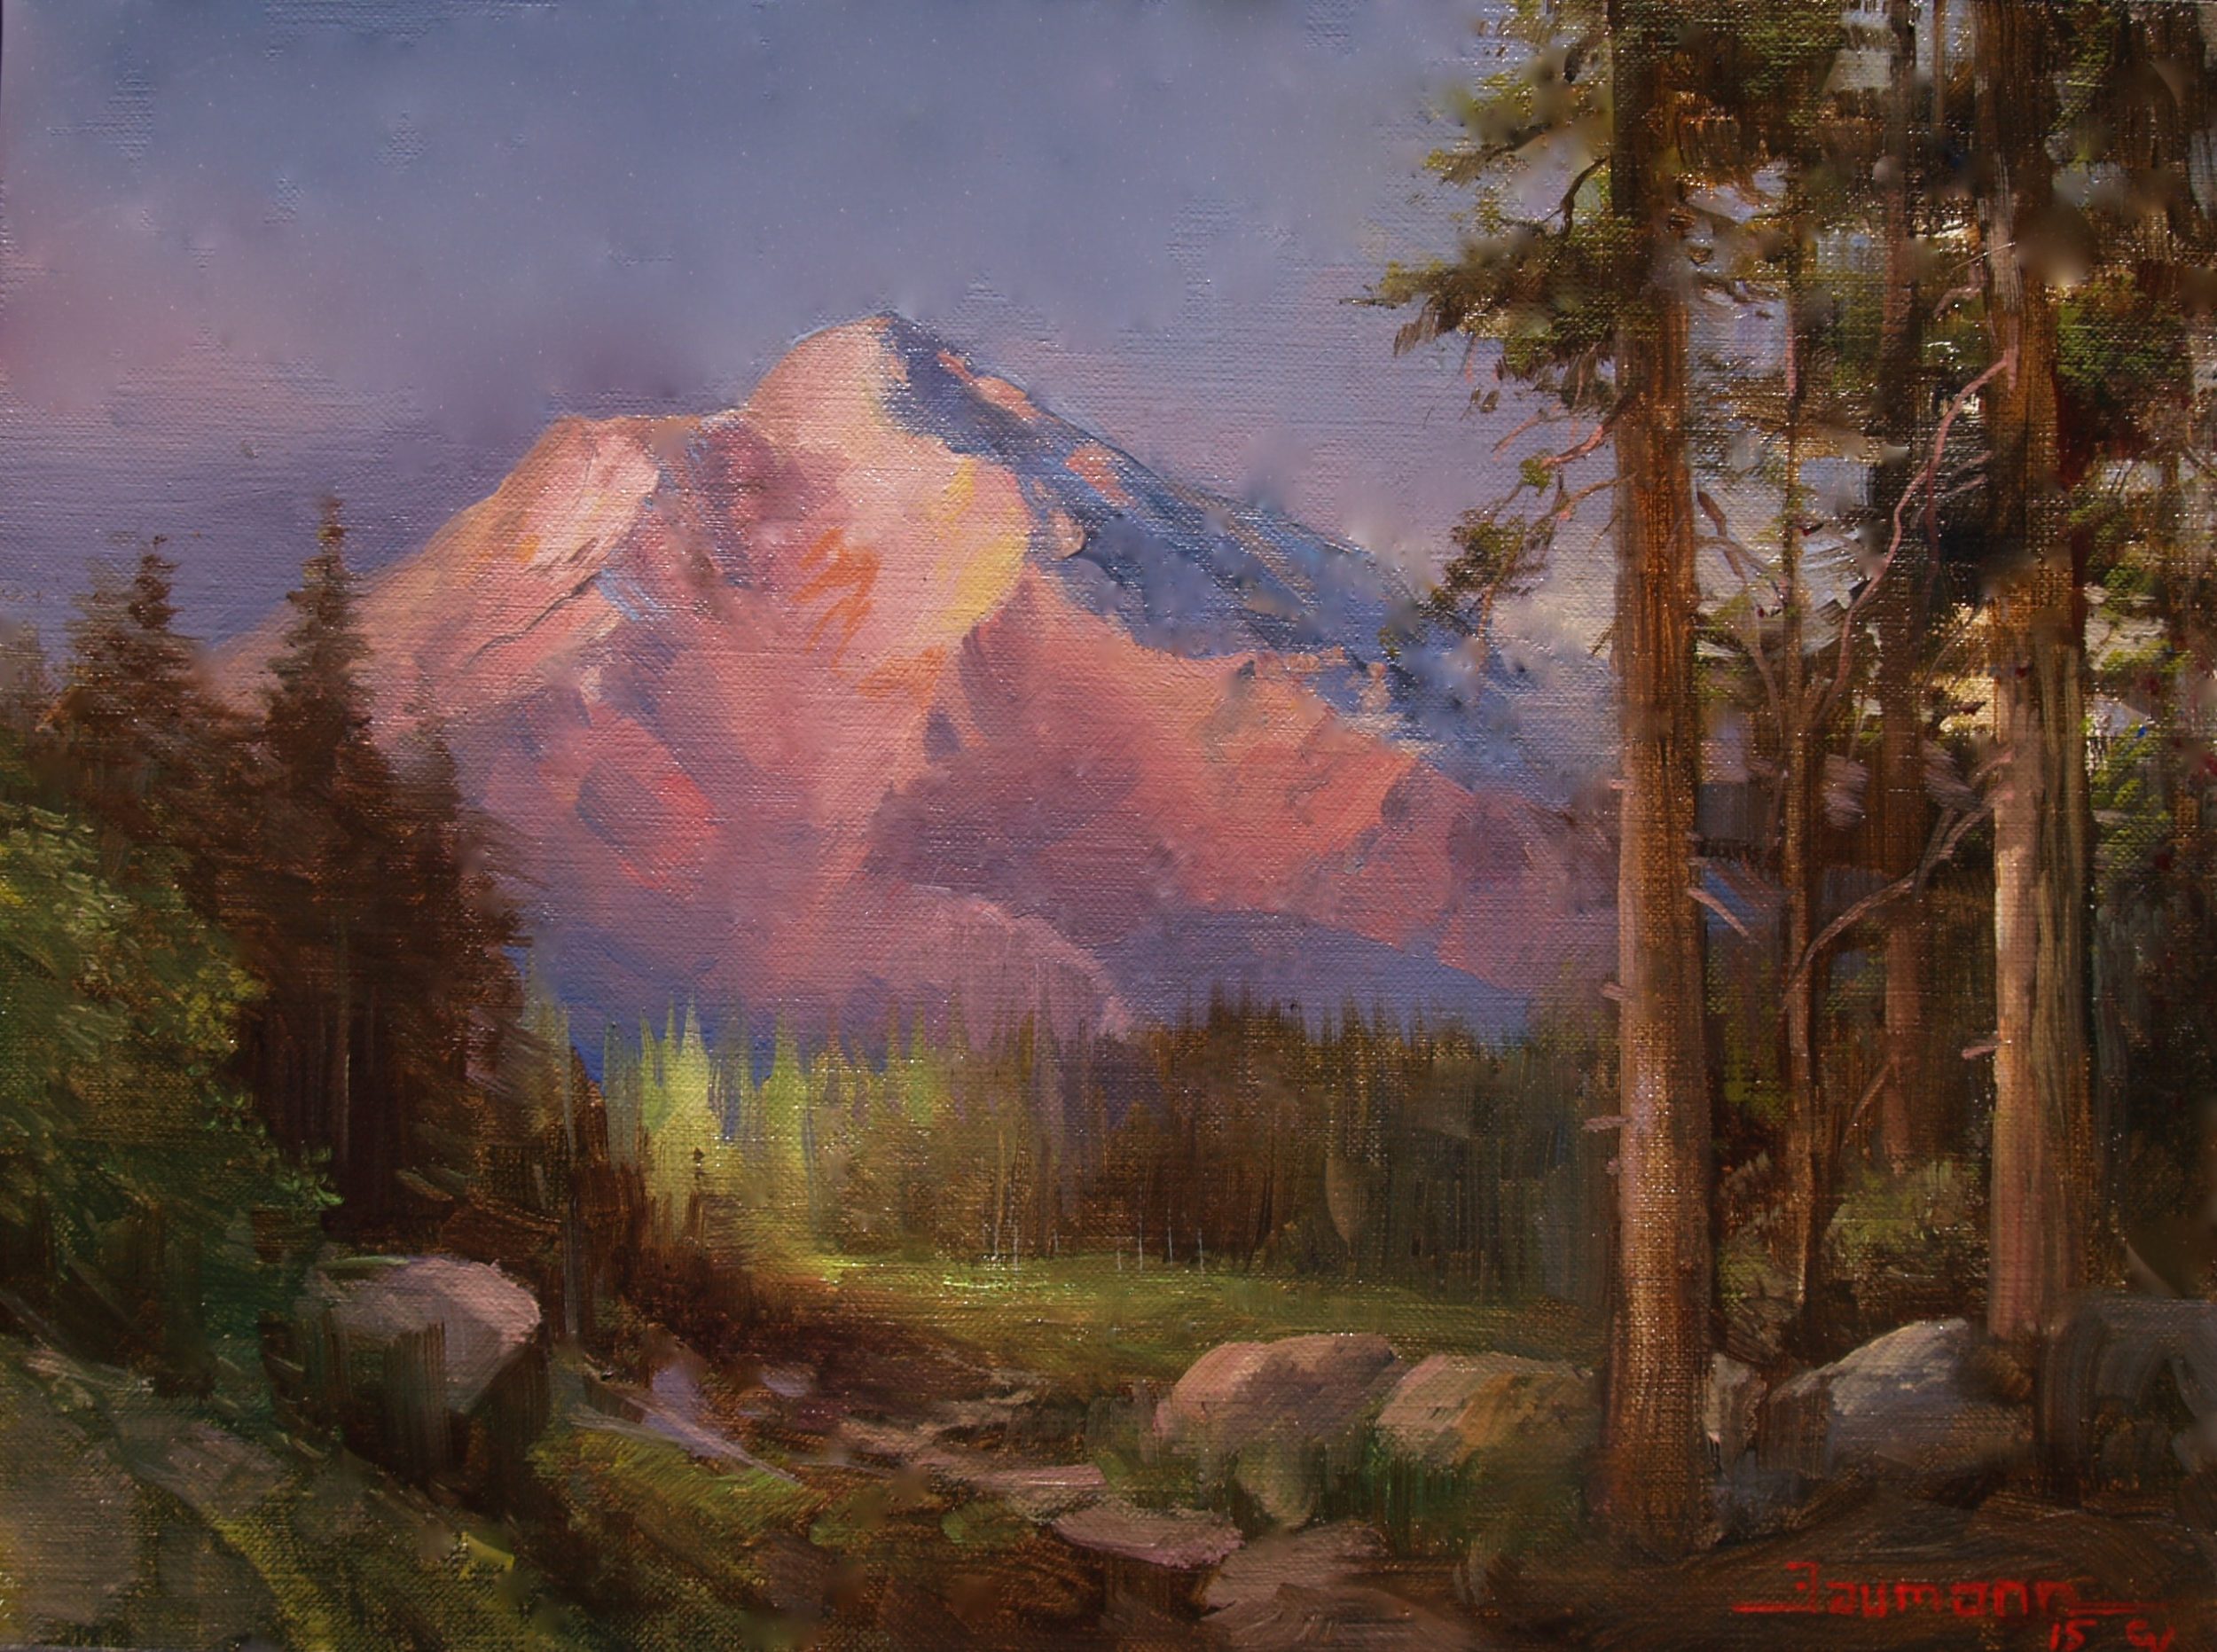 This is a painting by Stefan Baumann of Panther Meadows located at Mt. Shasta, CA featuring a alpine glow in pinks and orange paint that highlight the sun on the mountain.